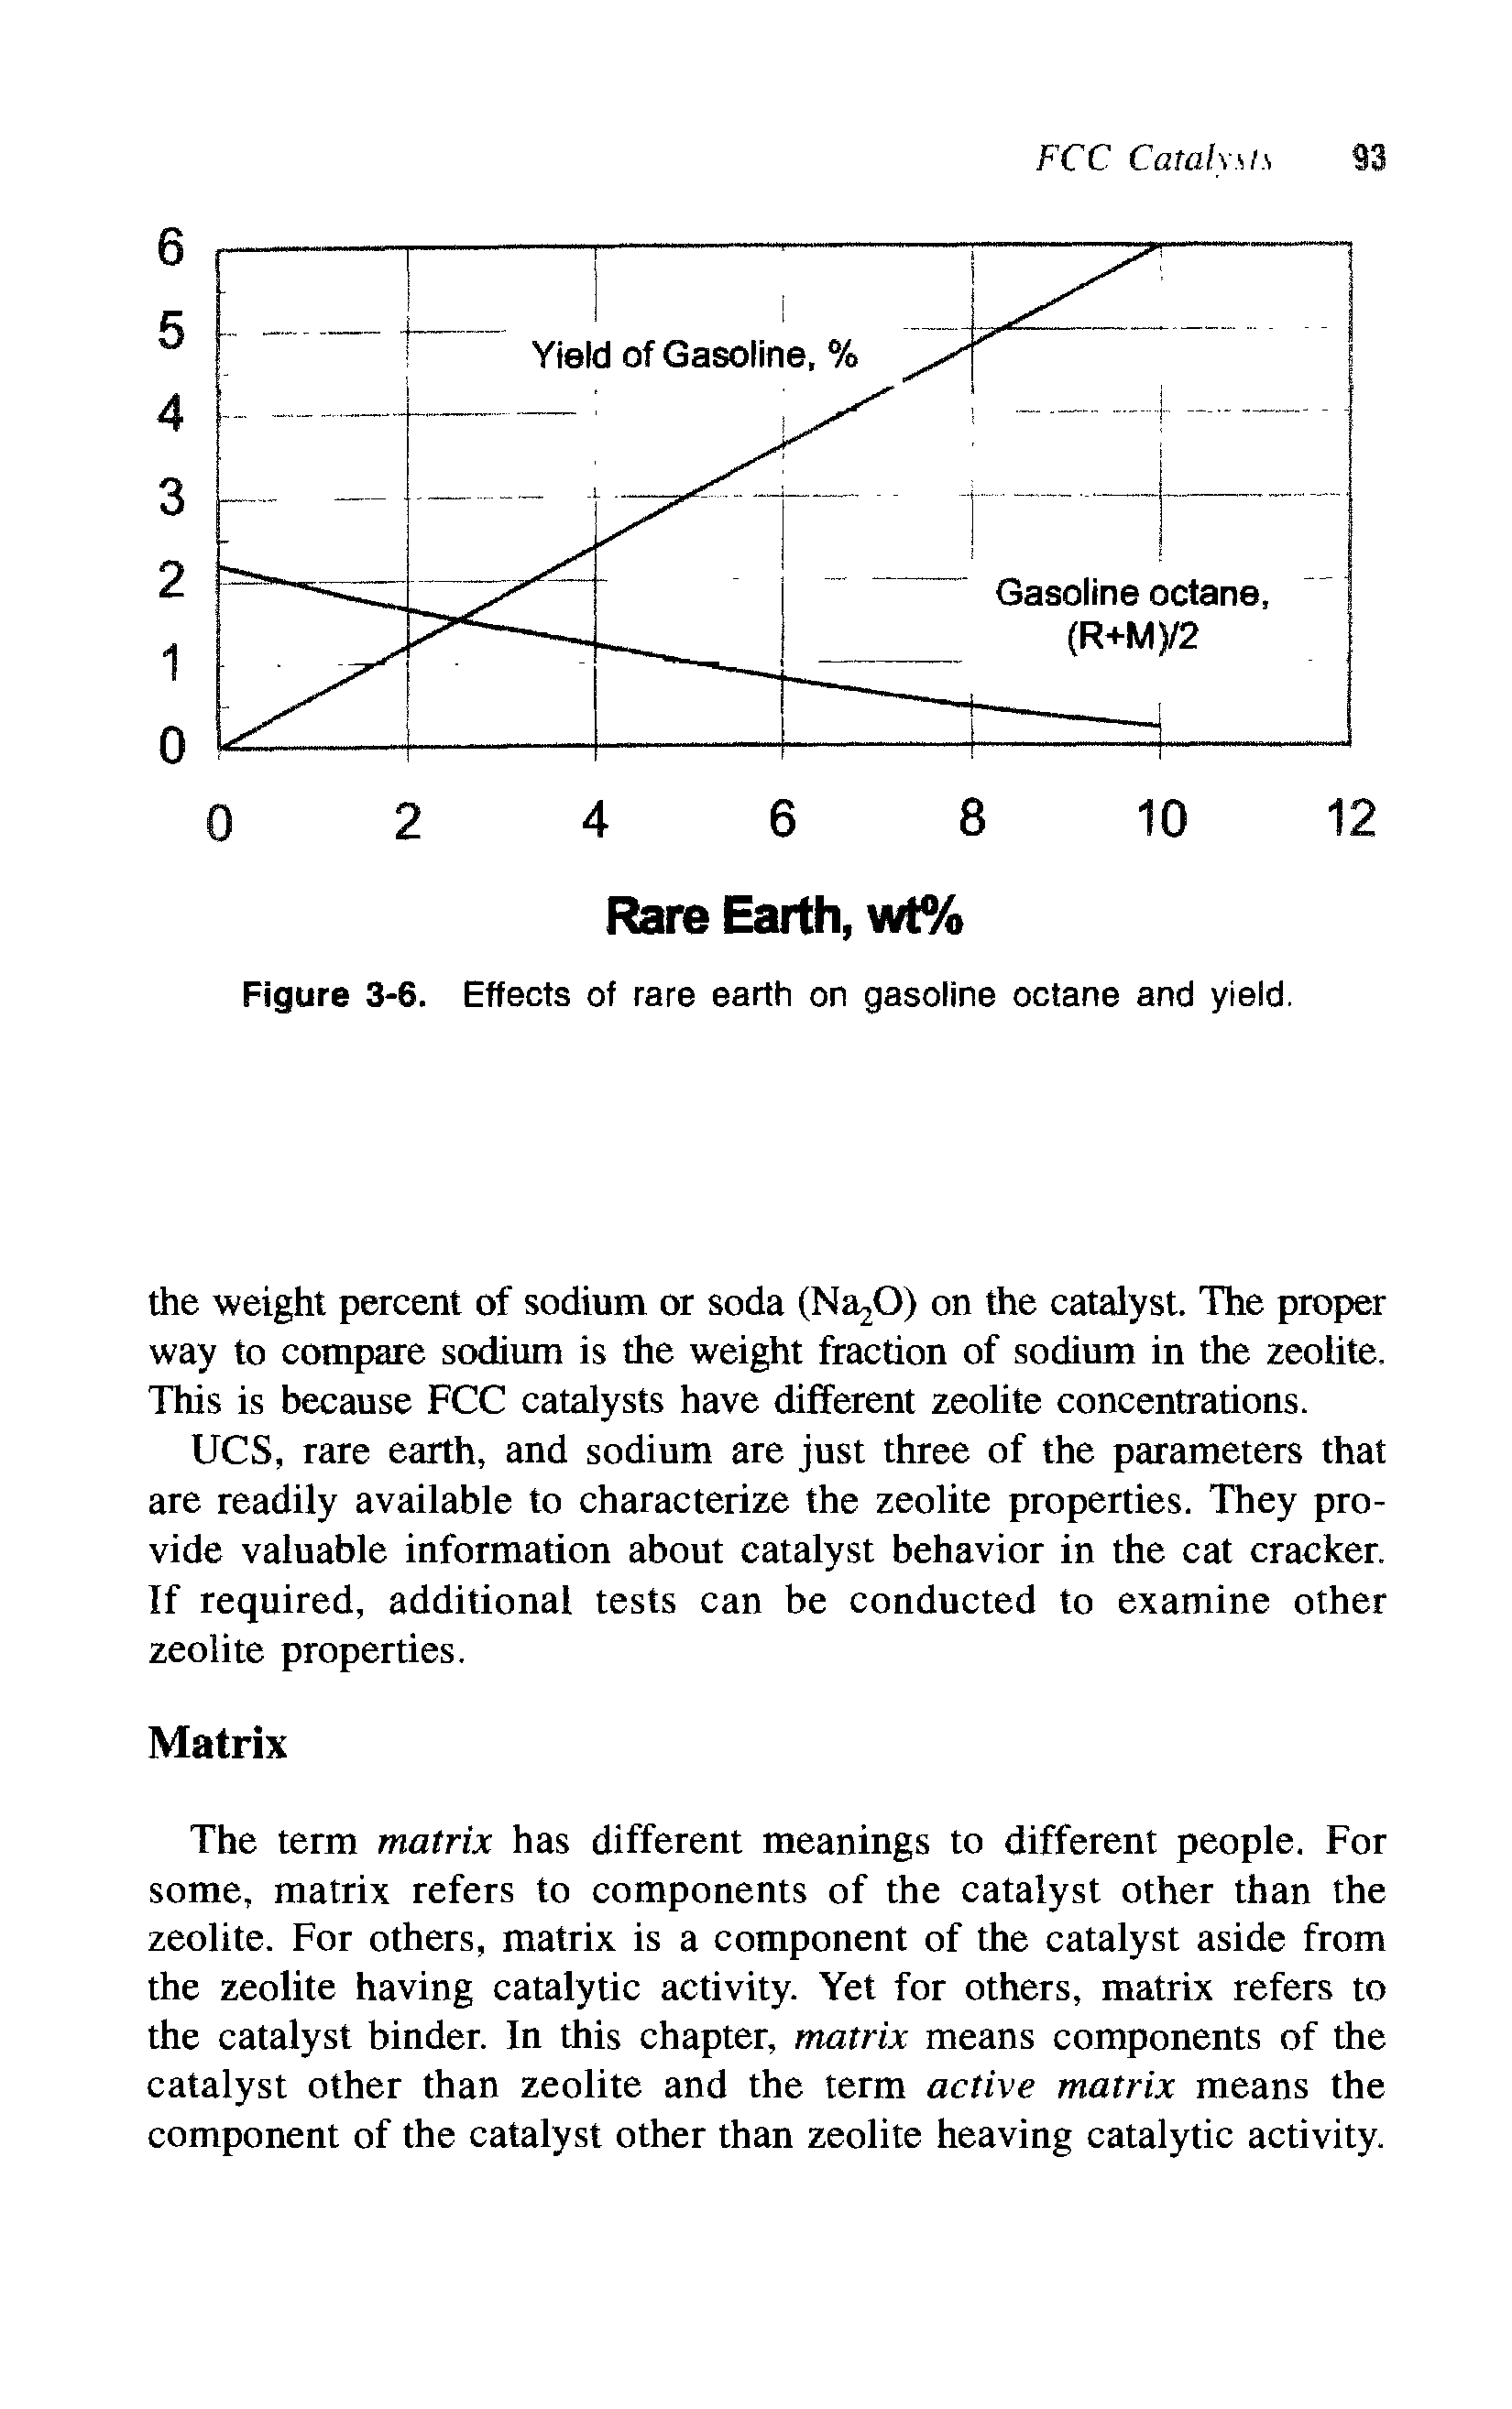 Figure 3-6. Effects of rare earth on gasoline octane and yield.